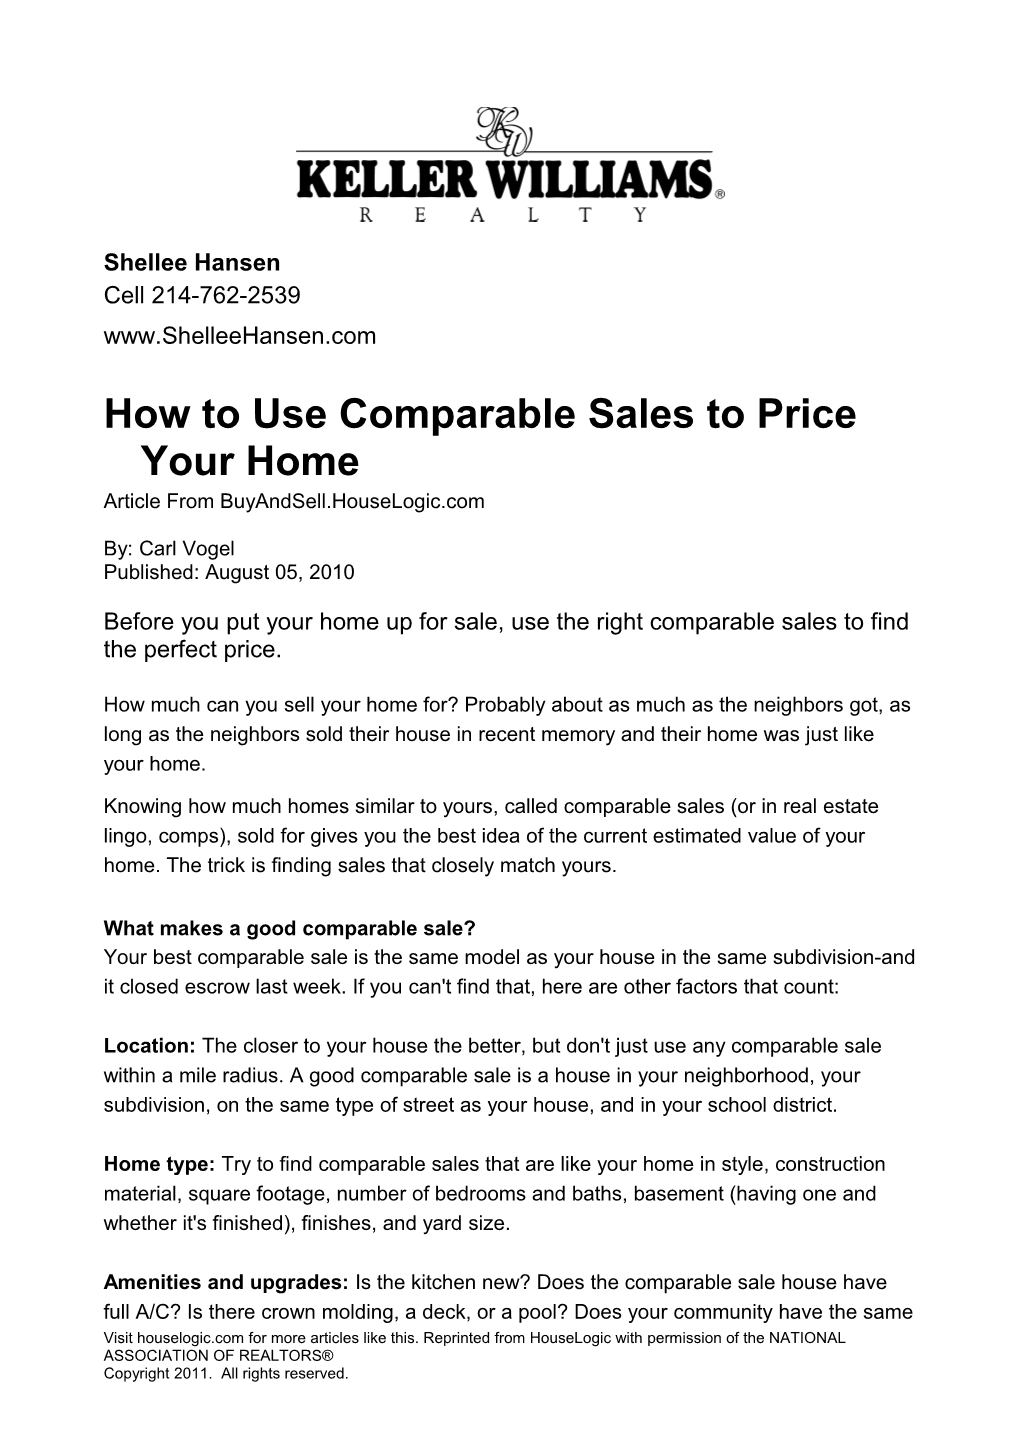 How to Use Comparable Sales to Price Your Home